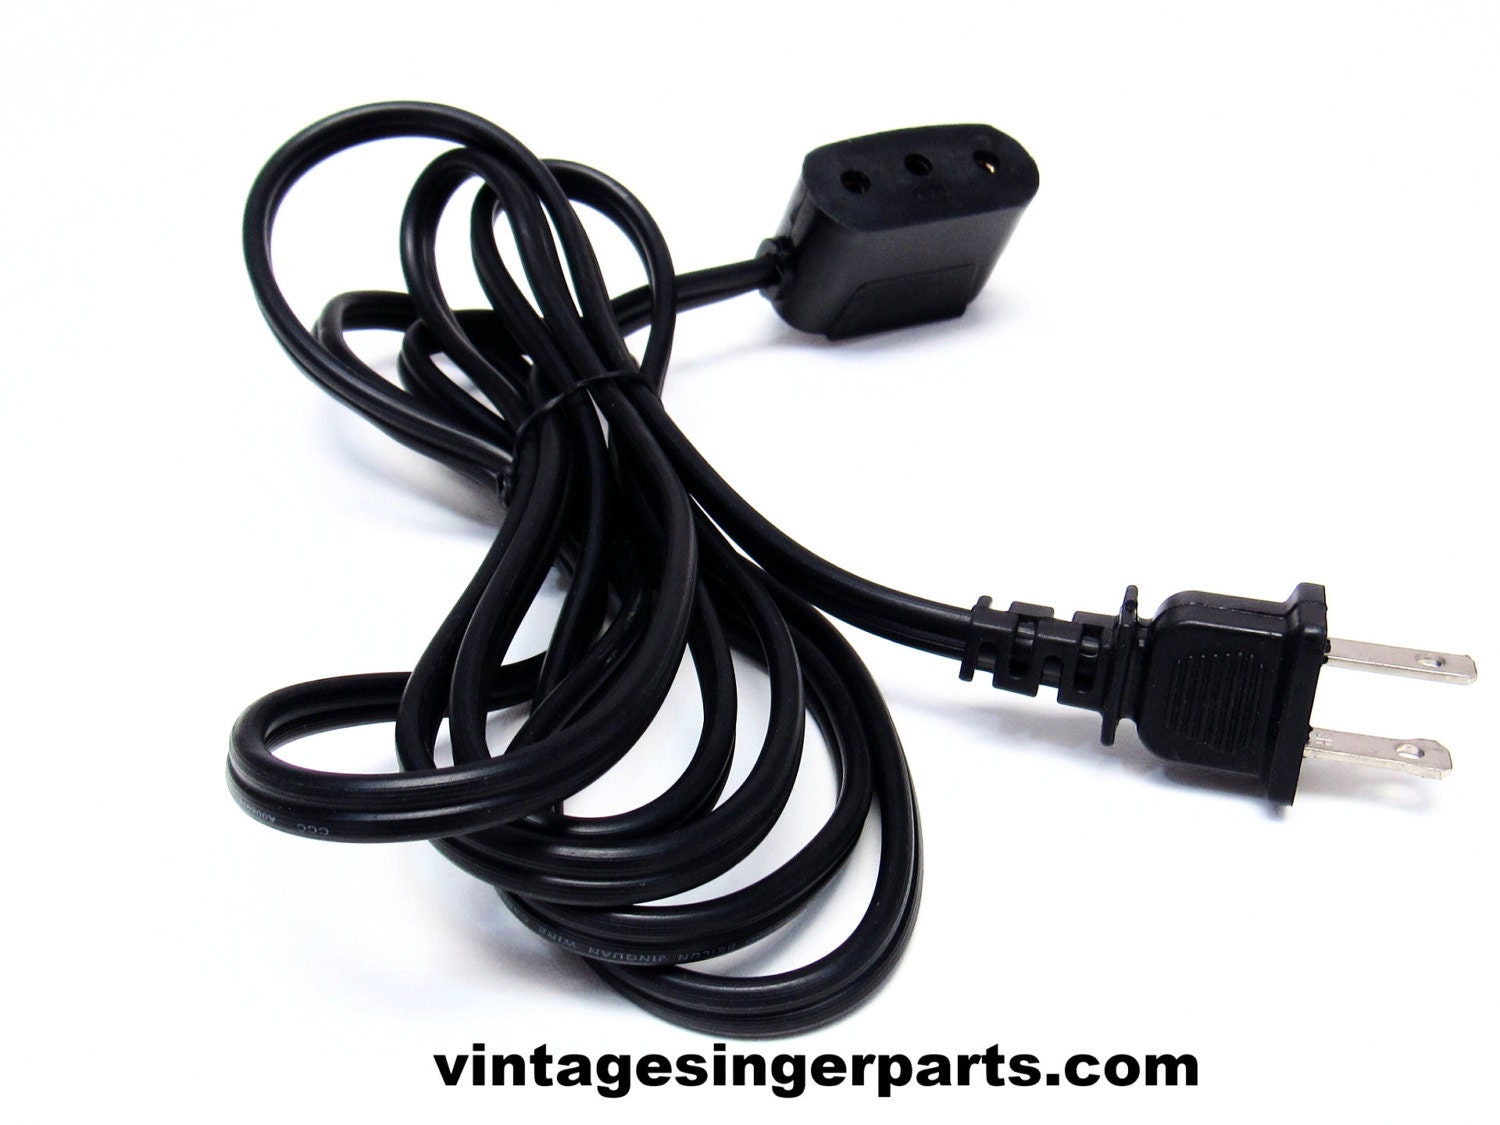 Singer Sewing Machine Power Cord Single Lead Fits 301A, 401A, 403A, 404